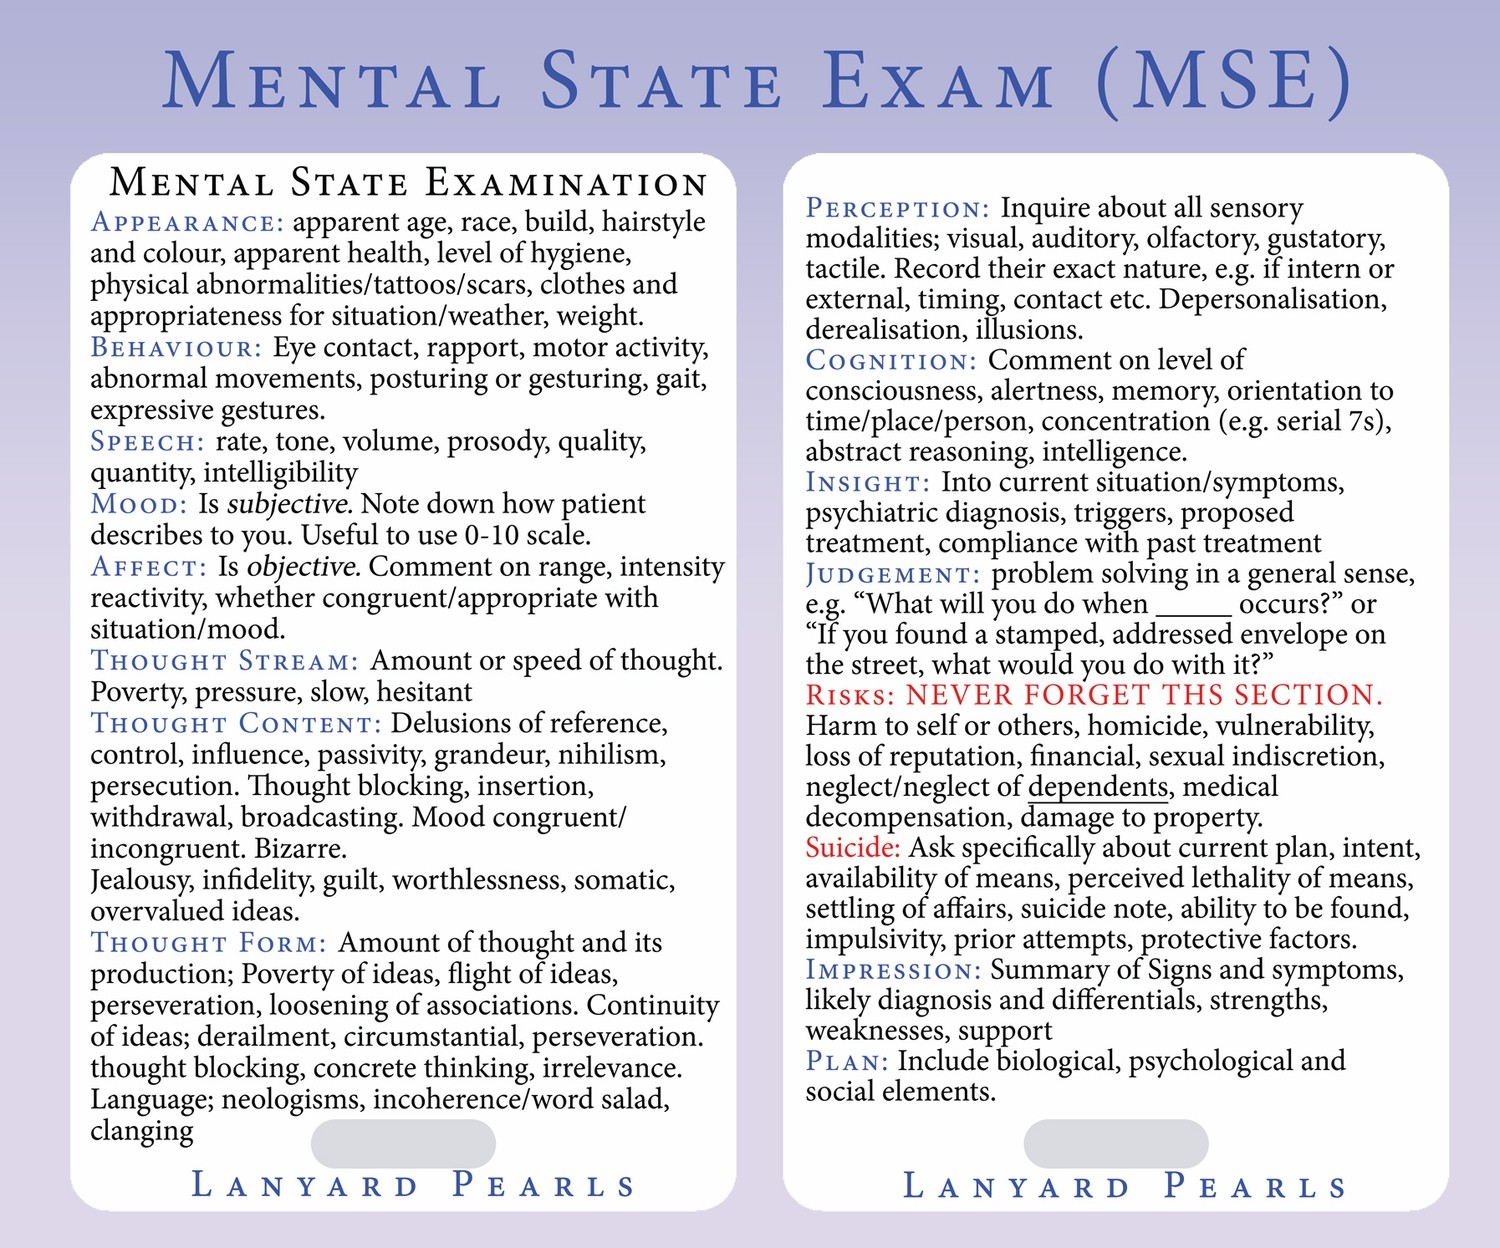 mental-state-exam-mse-lanyard-reference-card